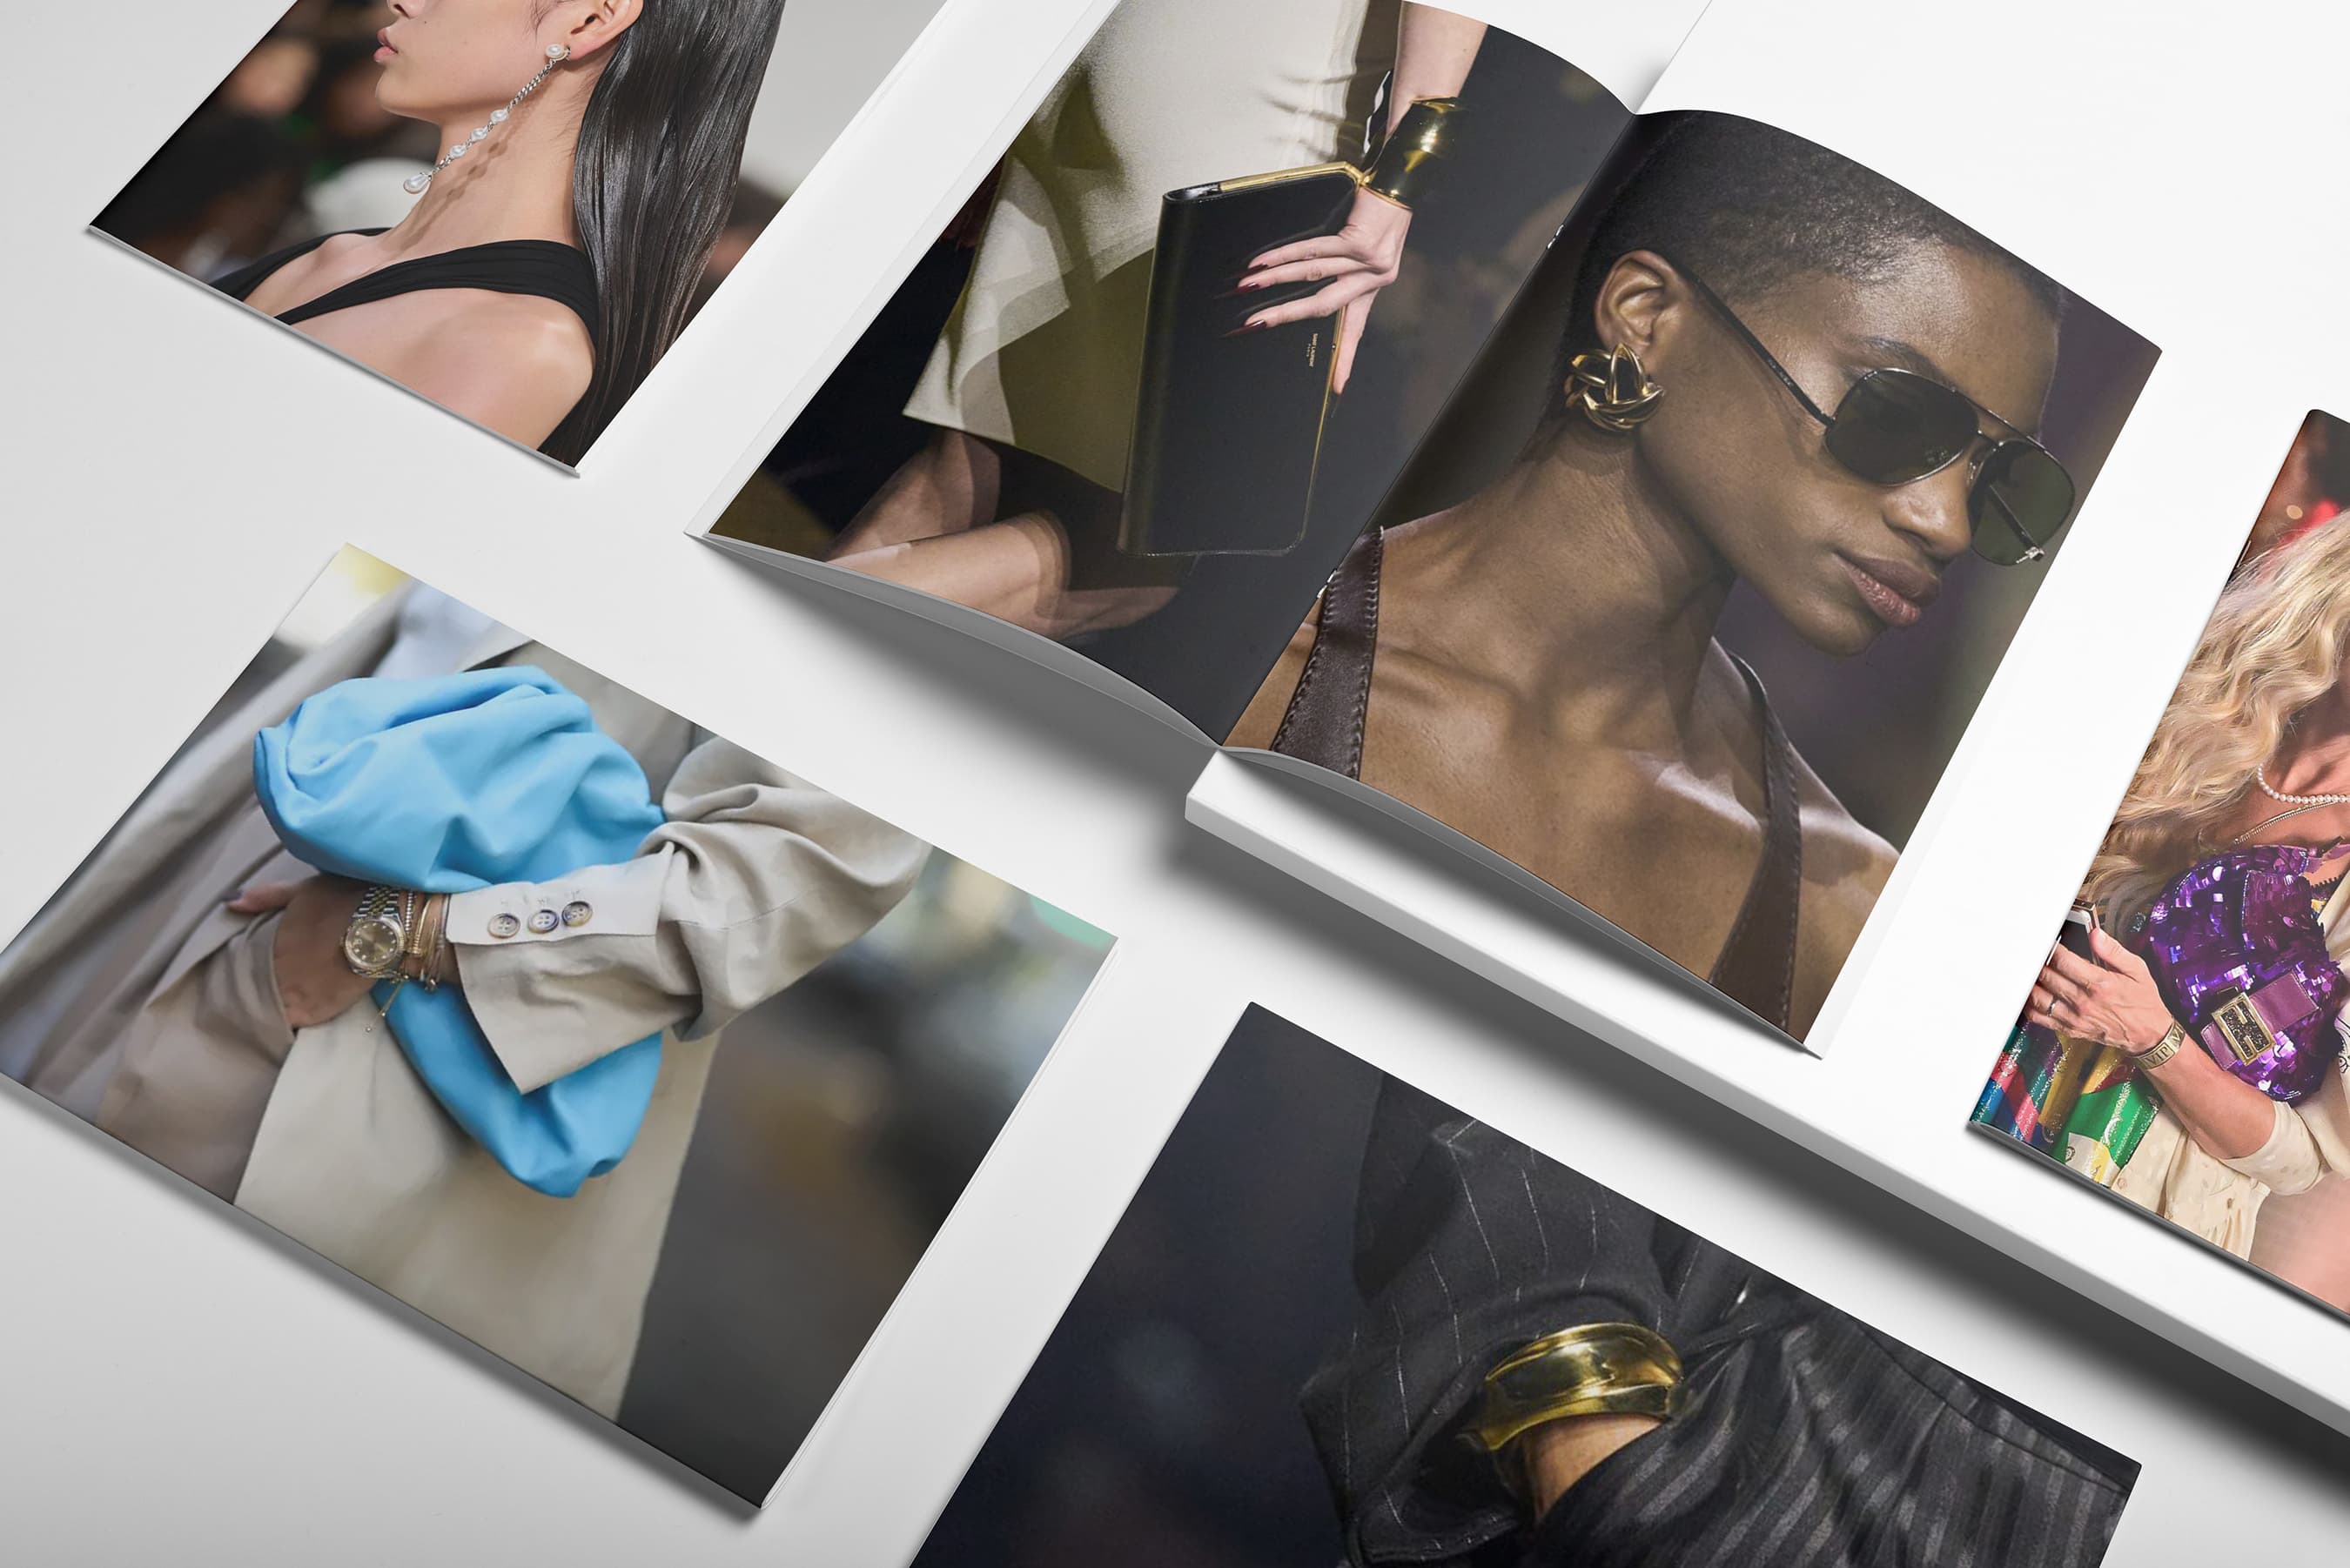 Accessories How to optimize the Value of the under-rated heroes Insight article header image with photos of Saint Laurent and Bottega Veneta